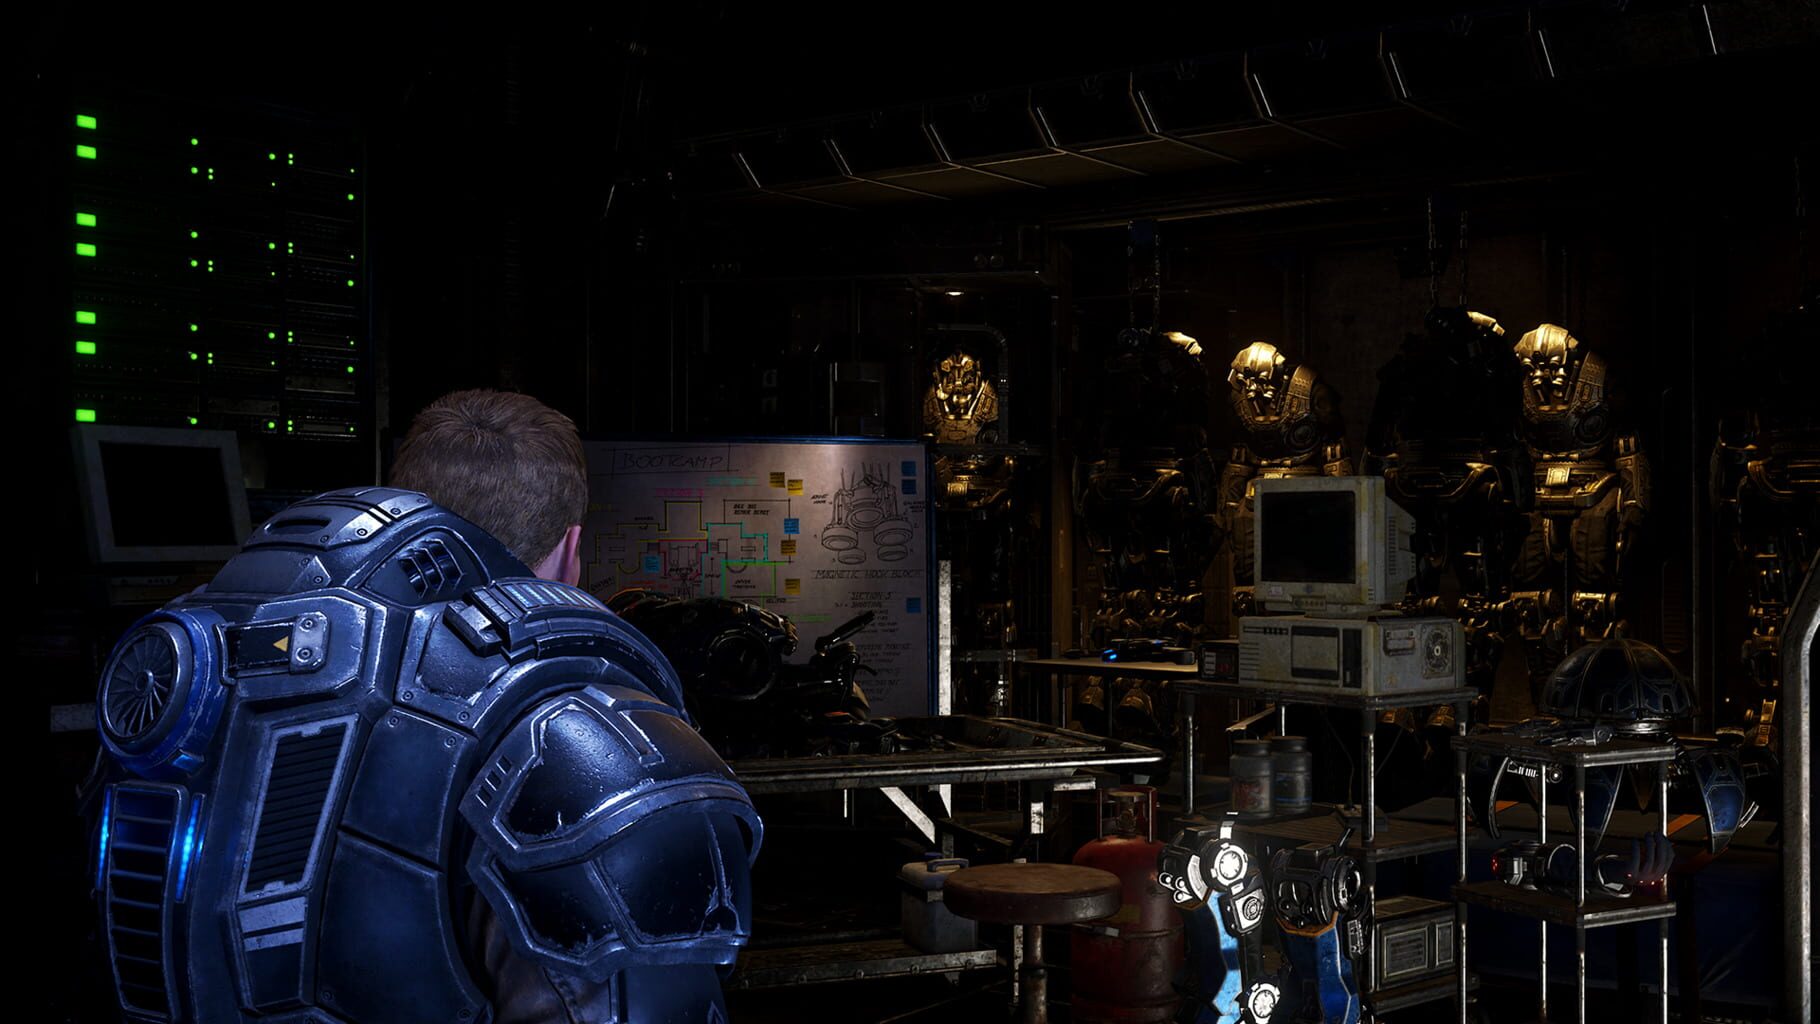 Gears 5 Game of the Year Edition screenshots